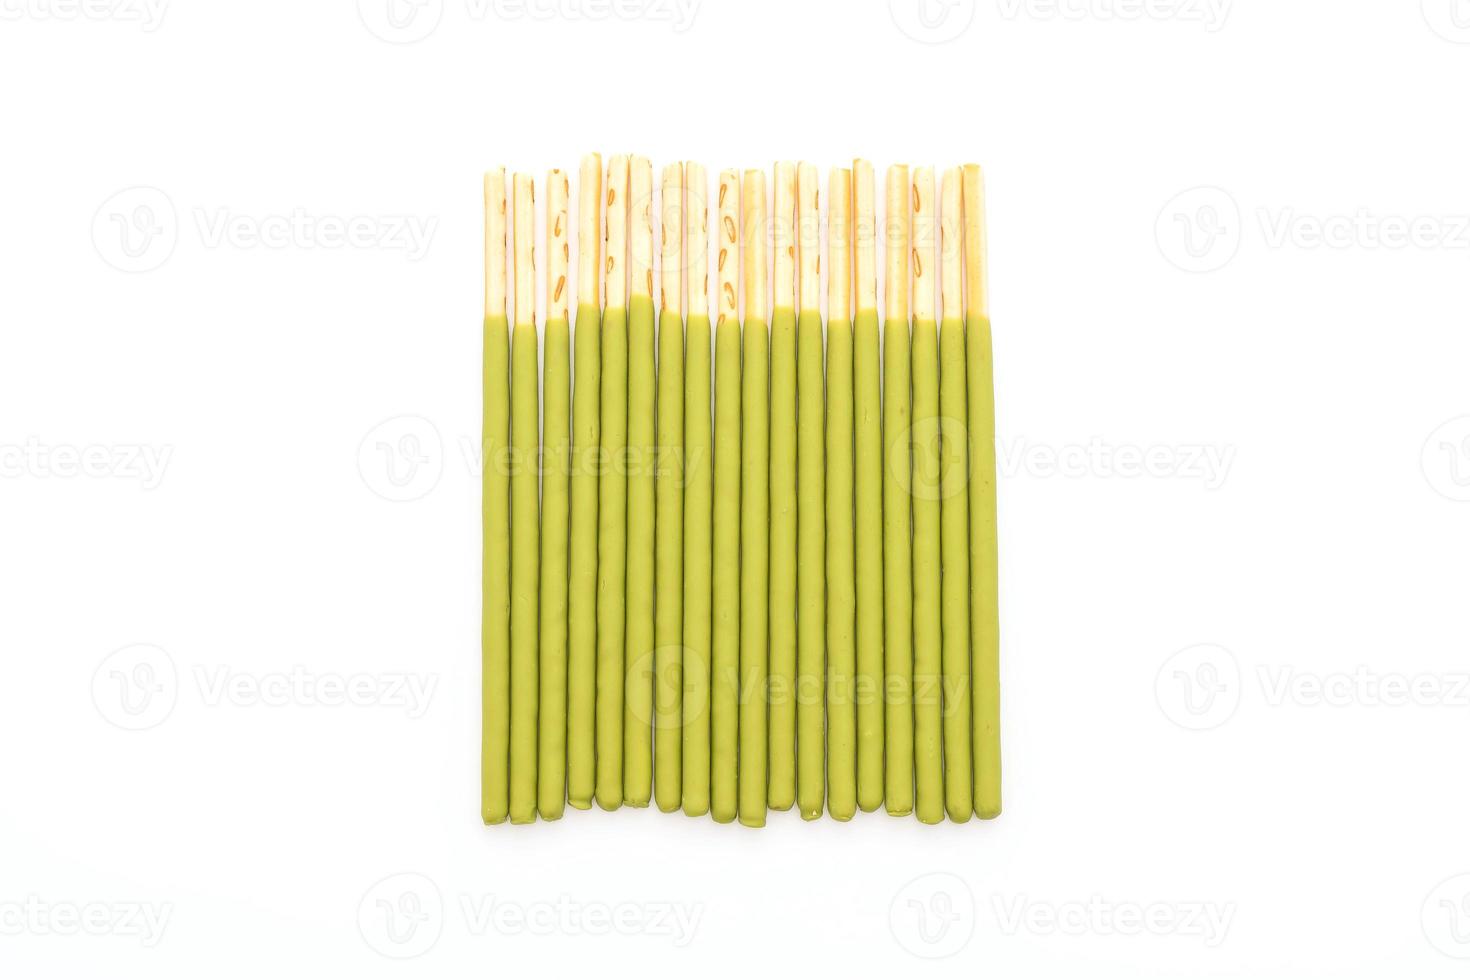 Biscuit stick with green tea flavored on white background photo